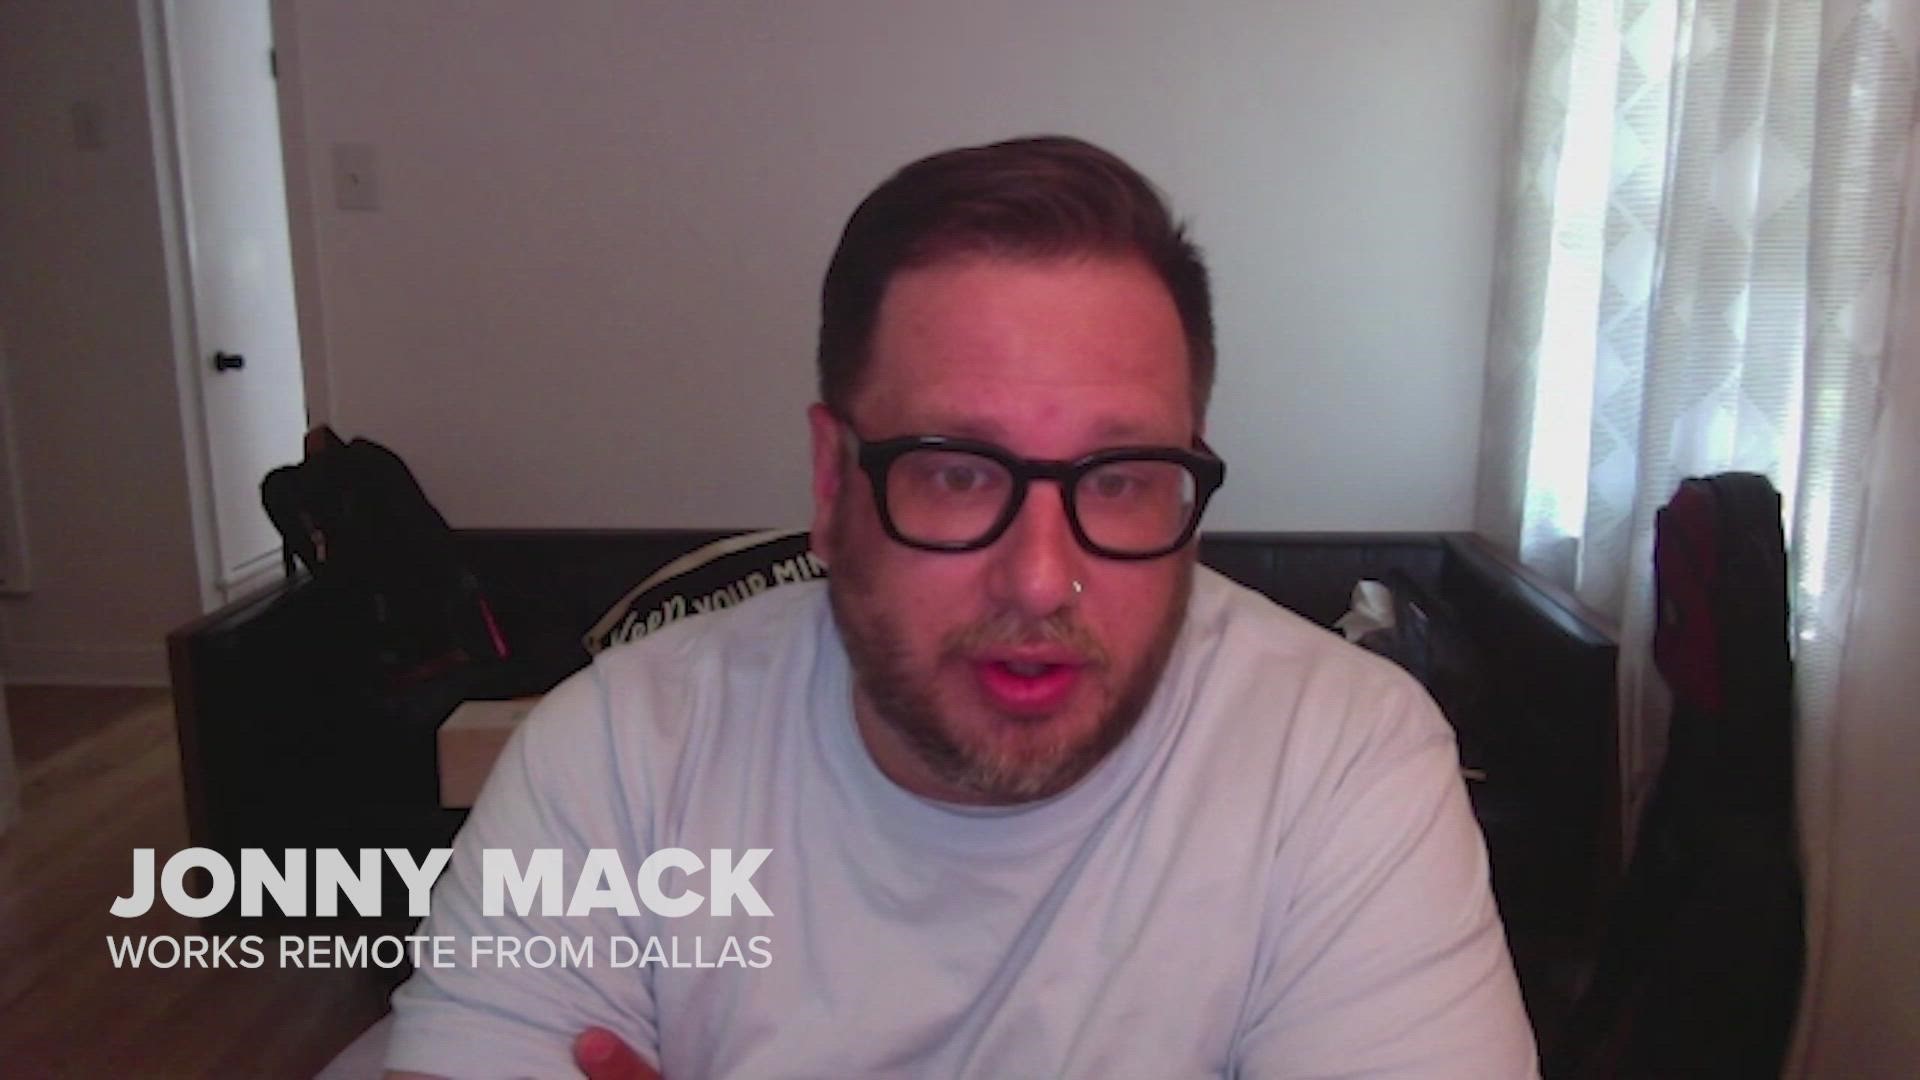 Jonny Mack never worked remote before the COVID-19 pandemic hit. Now, the Dallas homeowner says it has made him more productive.